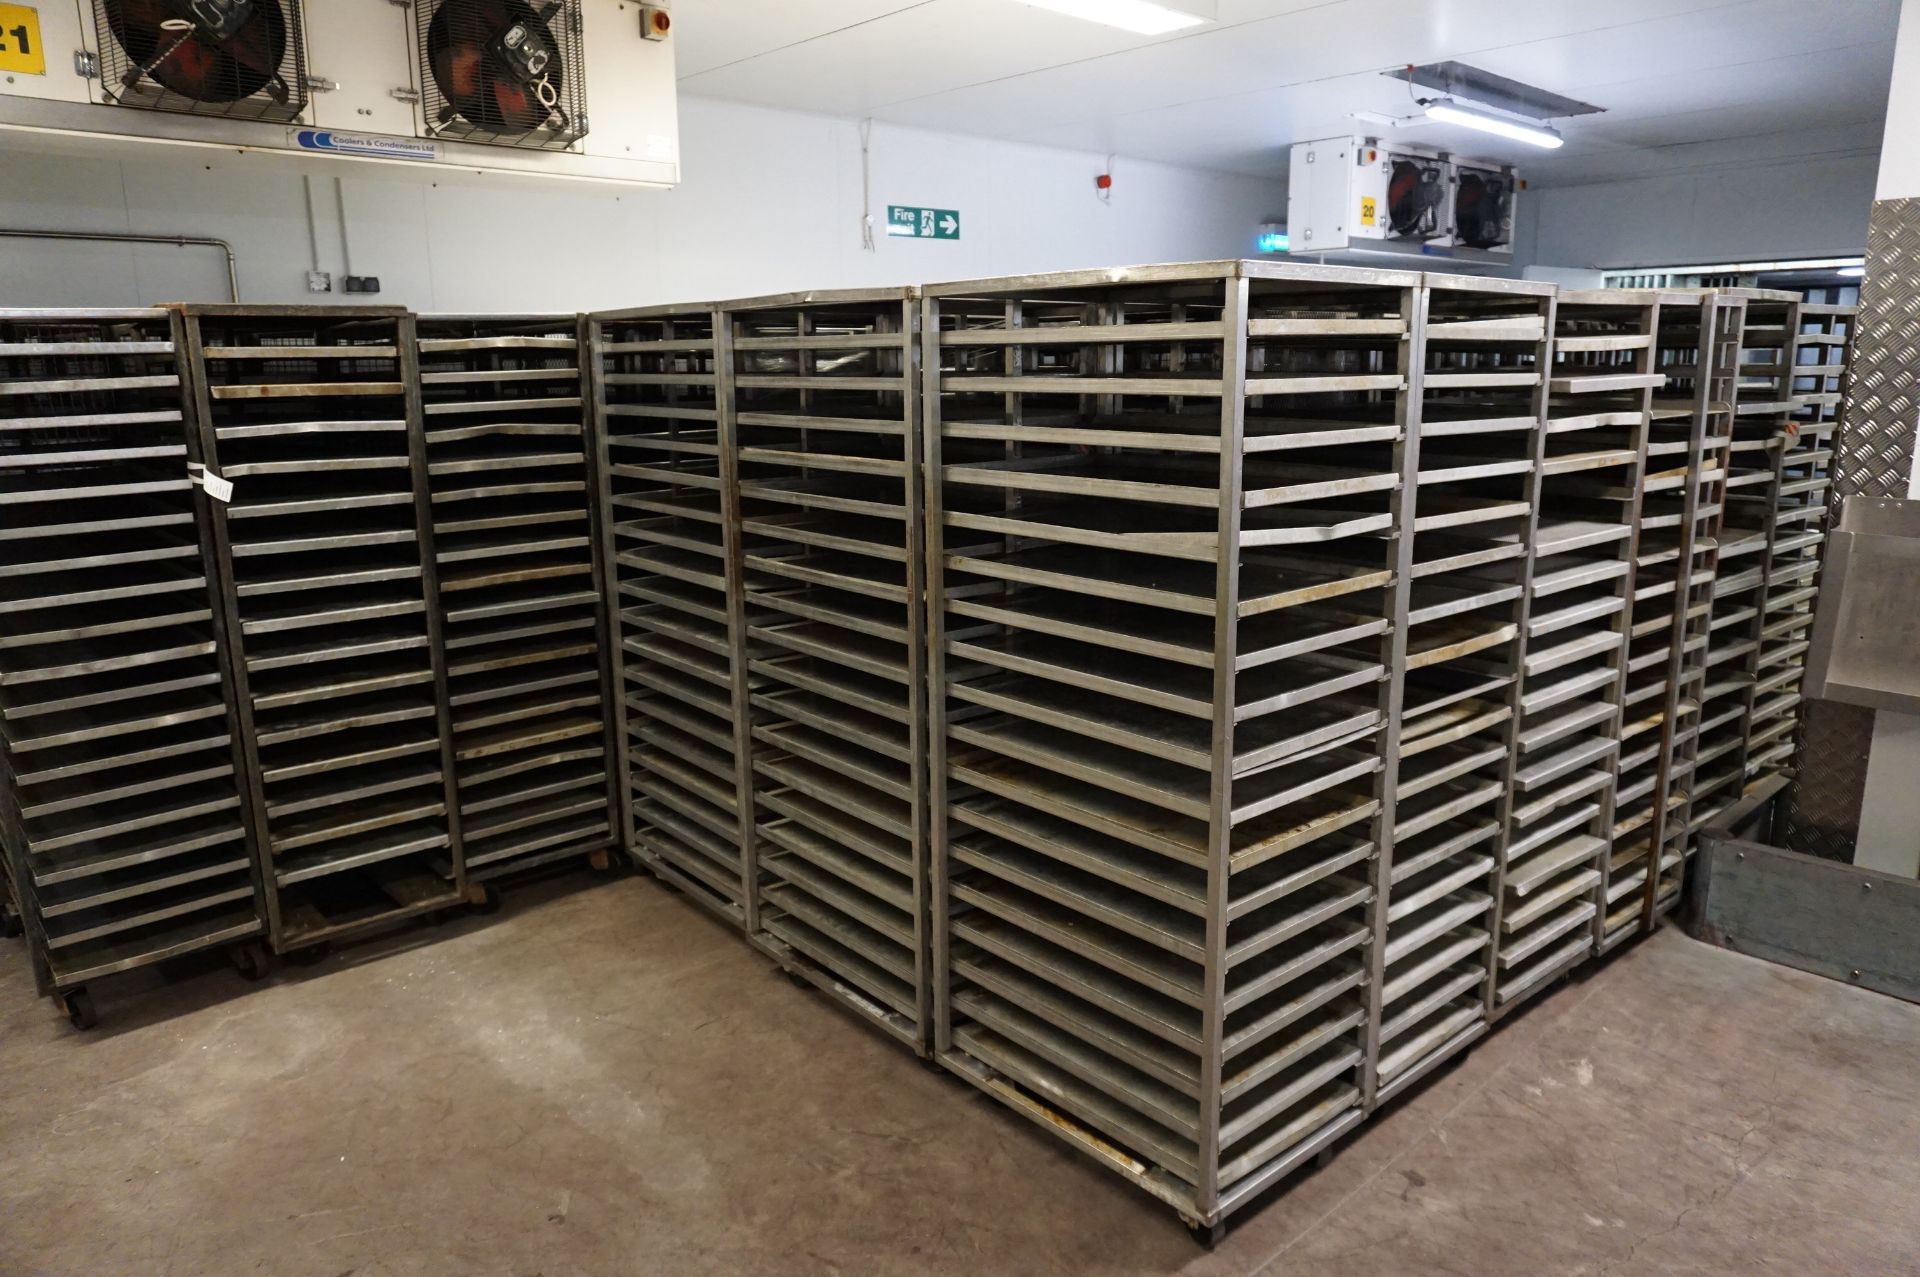 5 x Mobile oven racks with trays, 1.77m (h) (These will be allocated on a first come first served